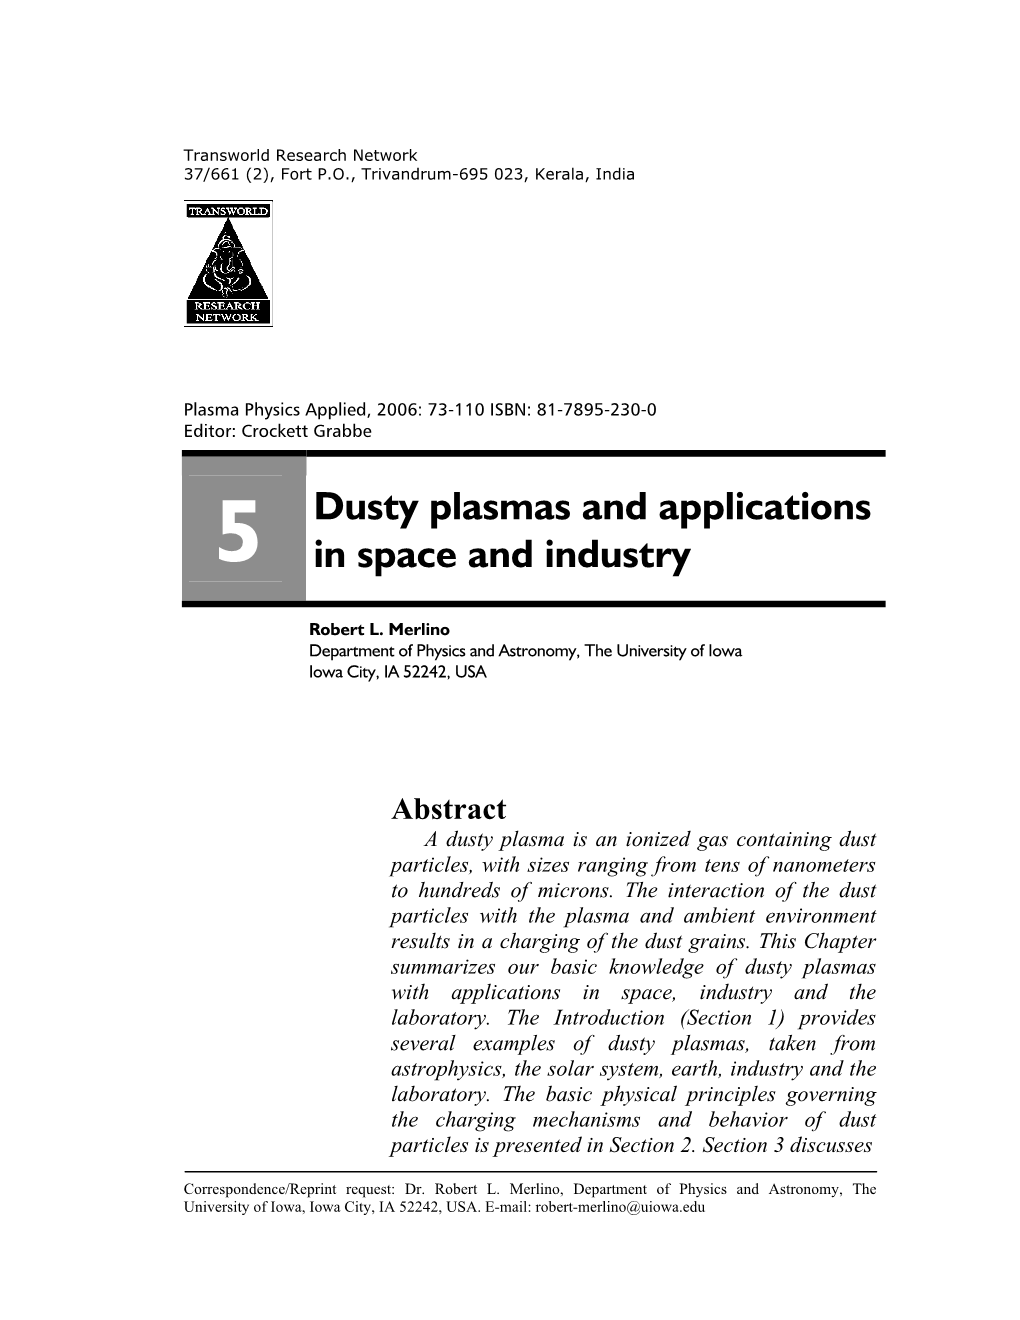 Dusty Plasmas and Applications in Space and Industry, R. L. Merlino